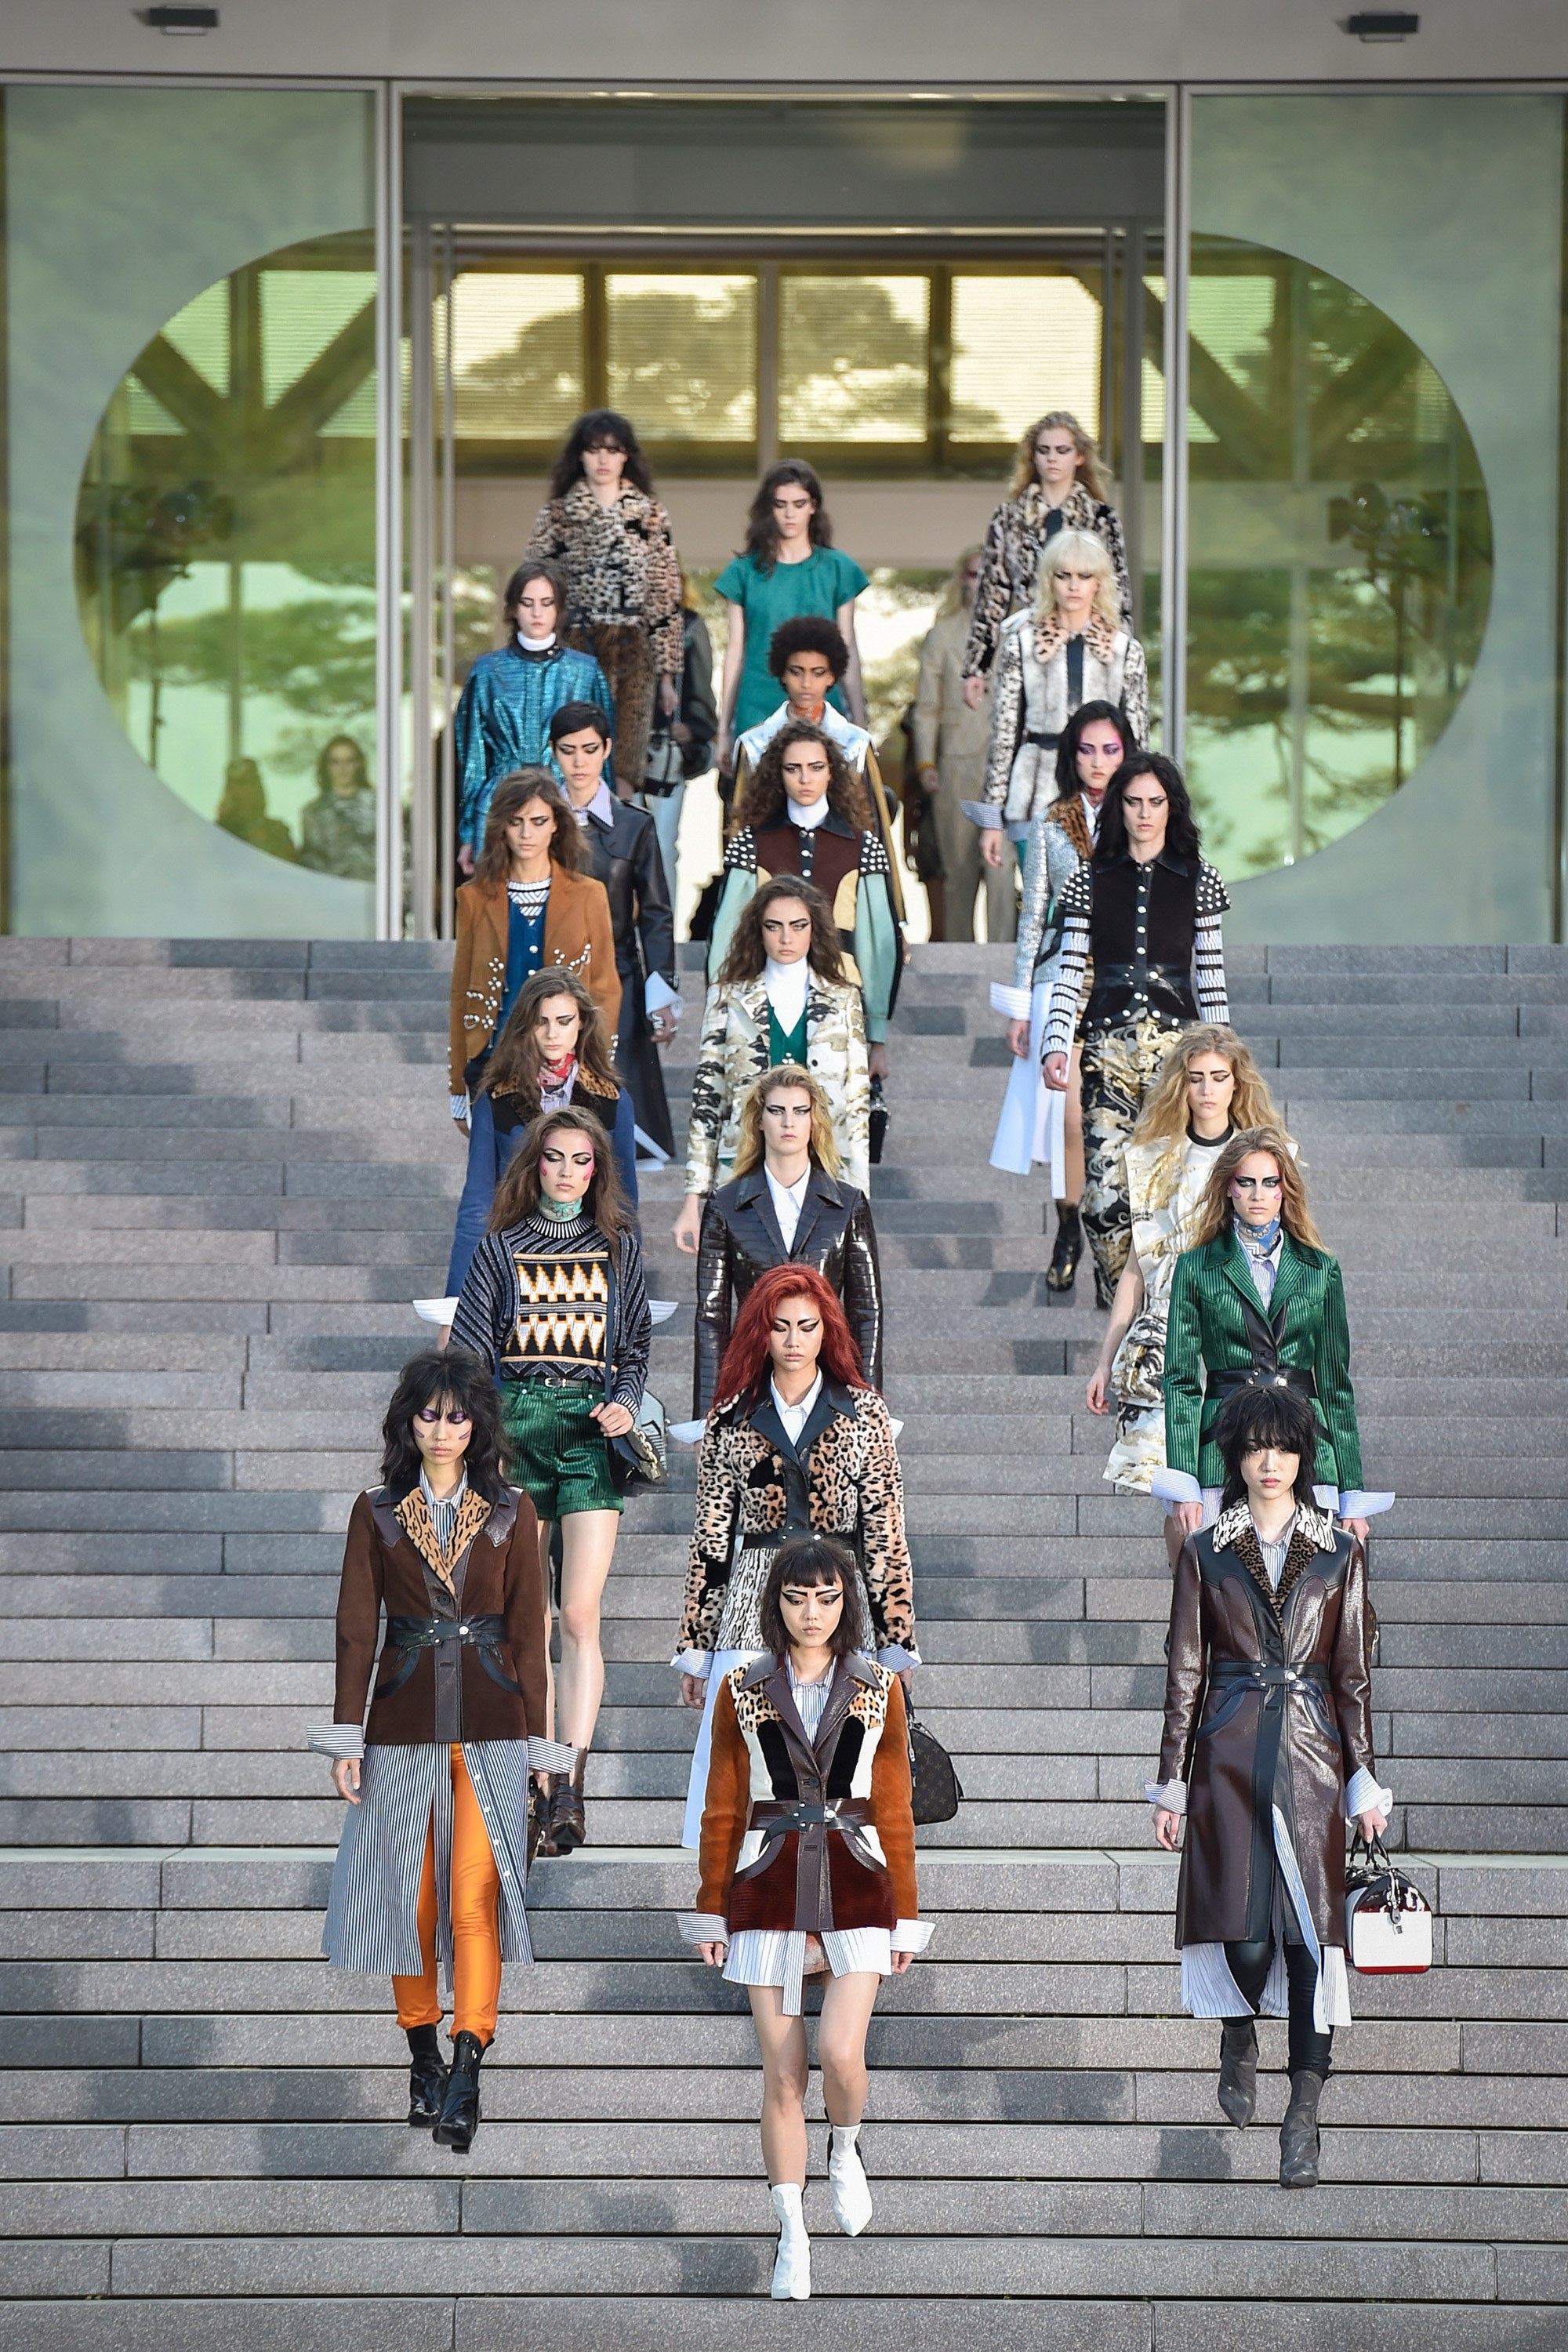 Louis Vuitton Cruise 2018 Show in Kyoto, Japan - Louis Vuitton Fashion Show  at Miho Museum in Japan